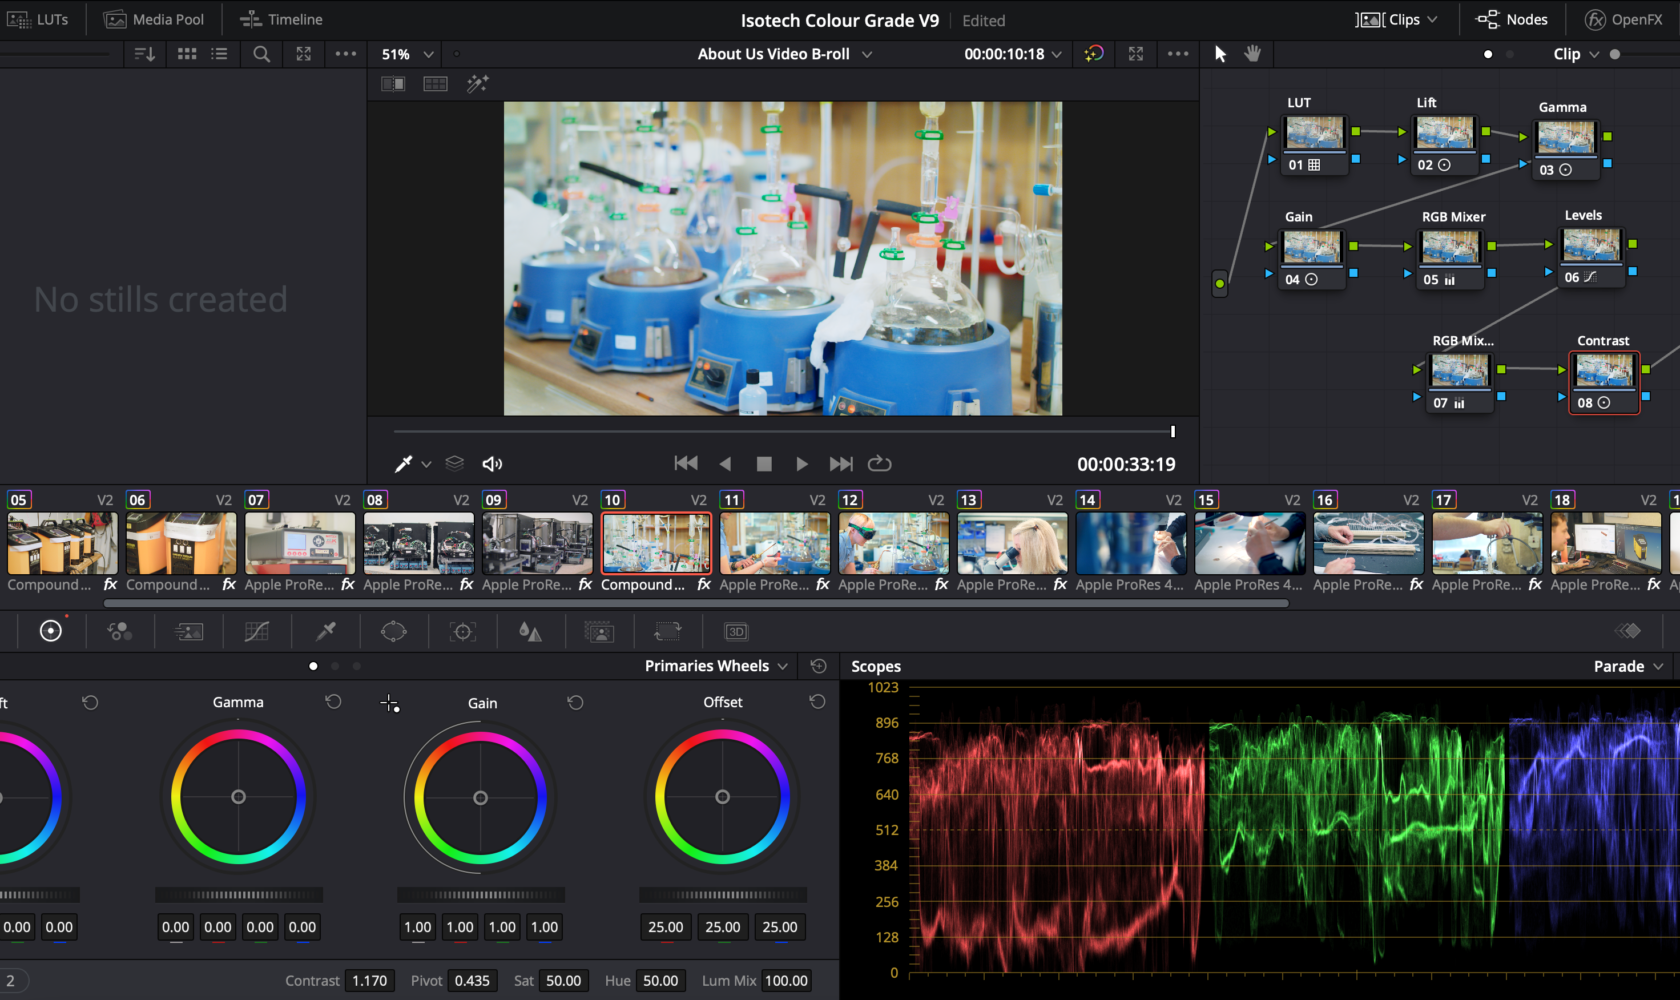 commercial video production editing of Isotech laboratory